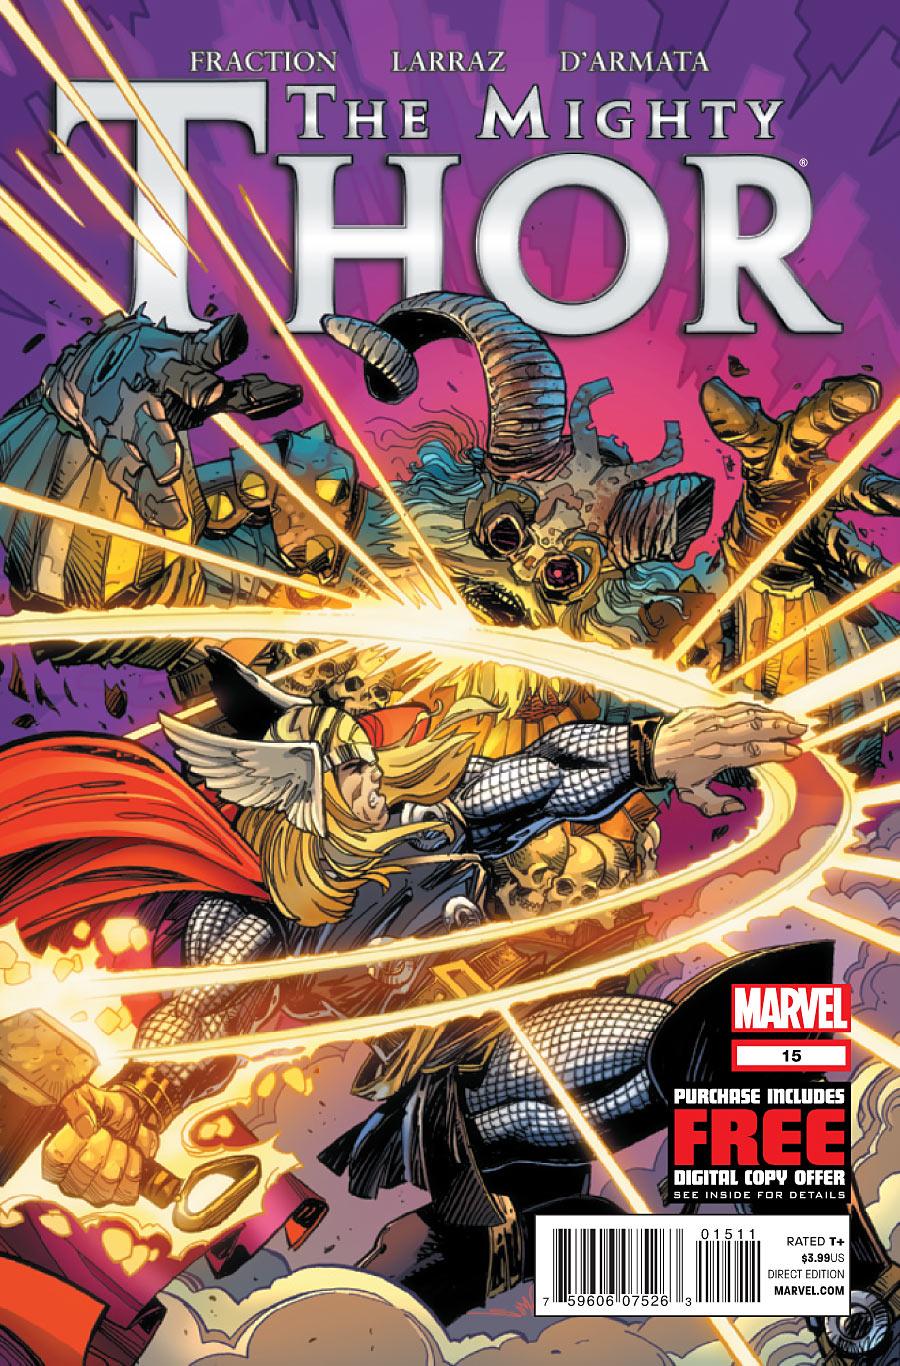 The Mighty Thor Vol. 1 #15